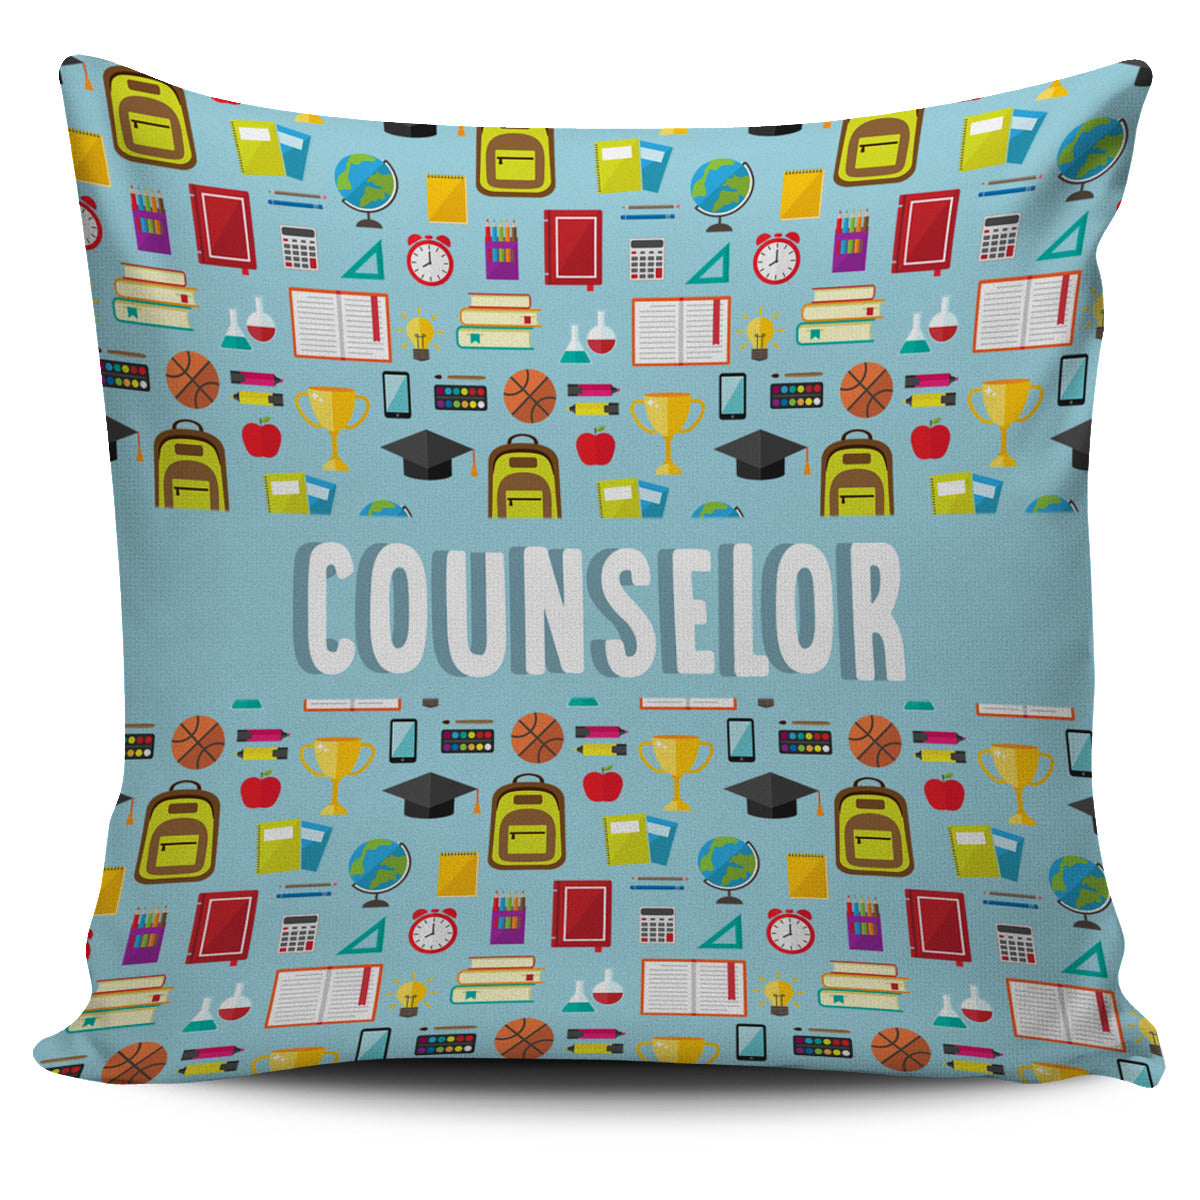 Counselor Pillow Cover